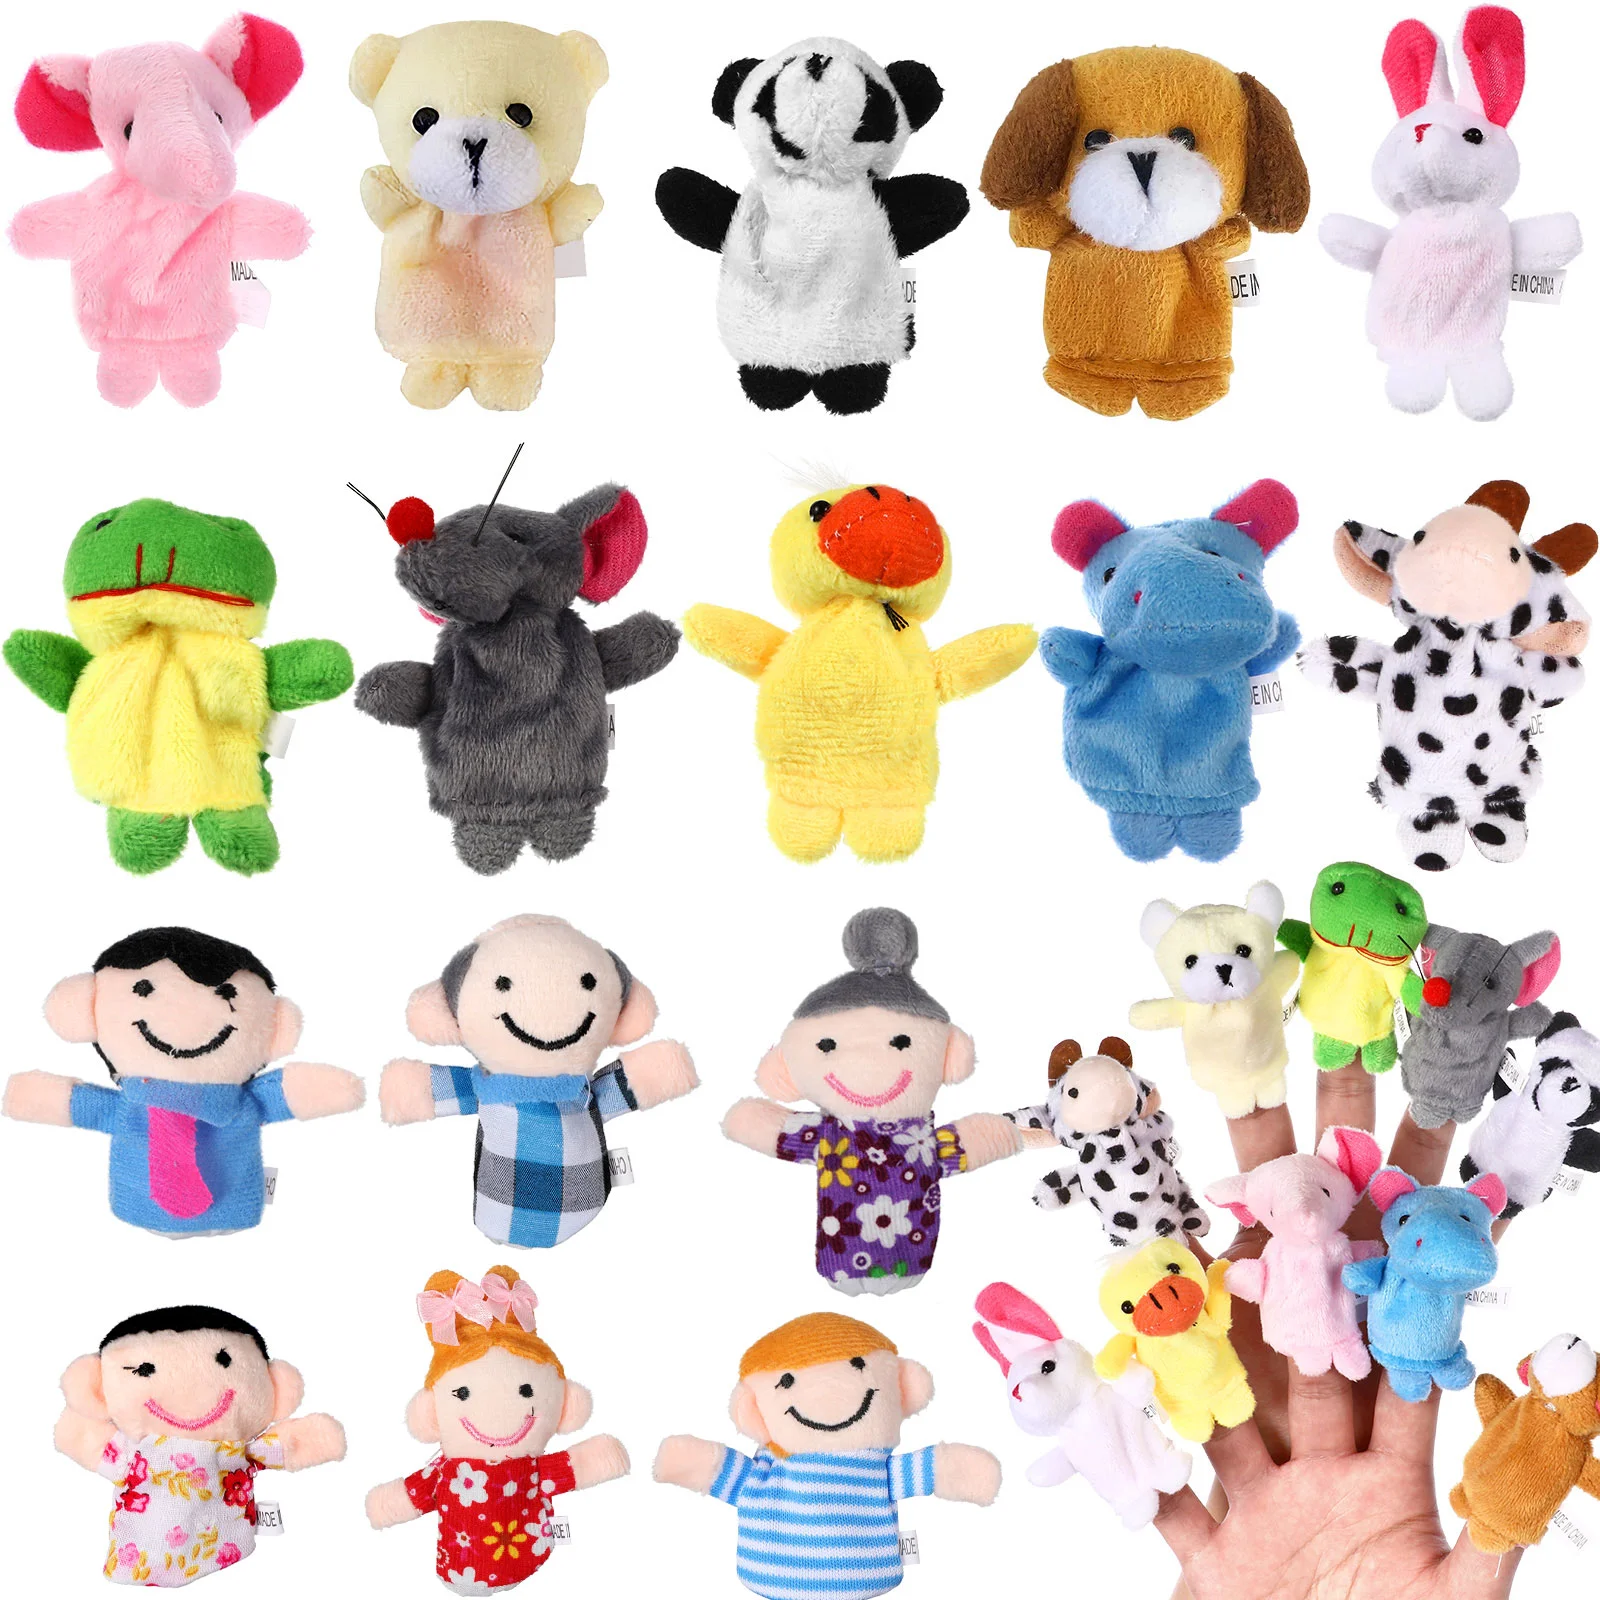 

16pcs Toddlers Finger Puppets Set Plush People Family Thumb Puppets Farm Educational Puppet for Children Toddler Random Pattern